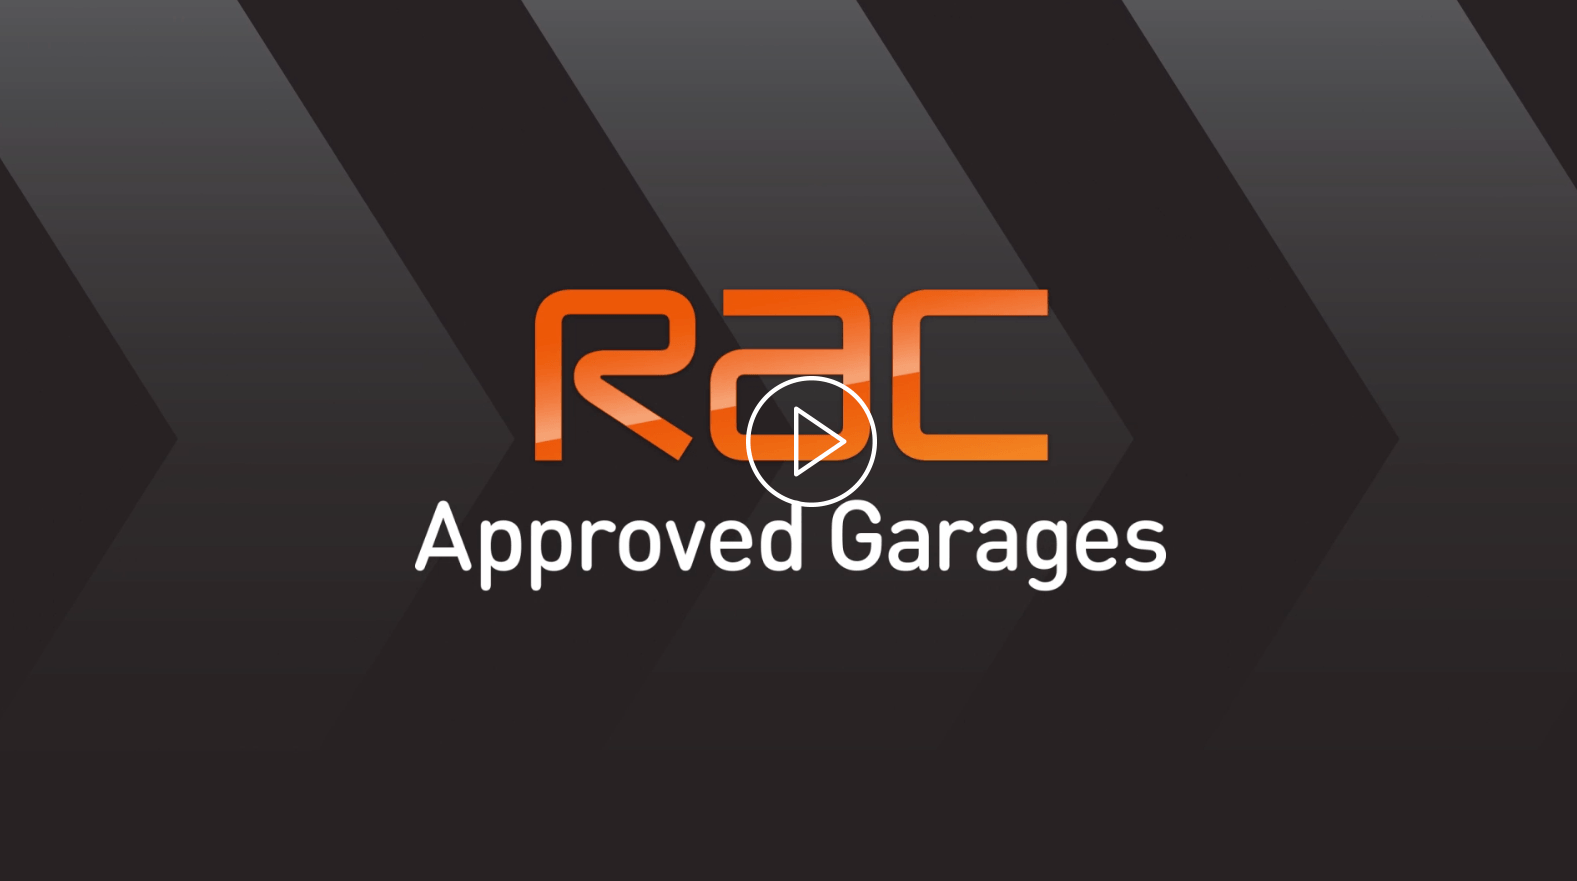 Personal Garage Logo - Home | RAC Approved Garages